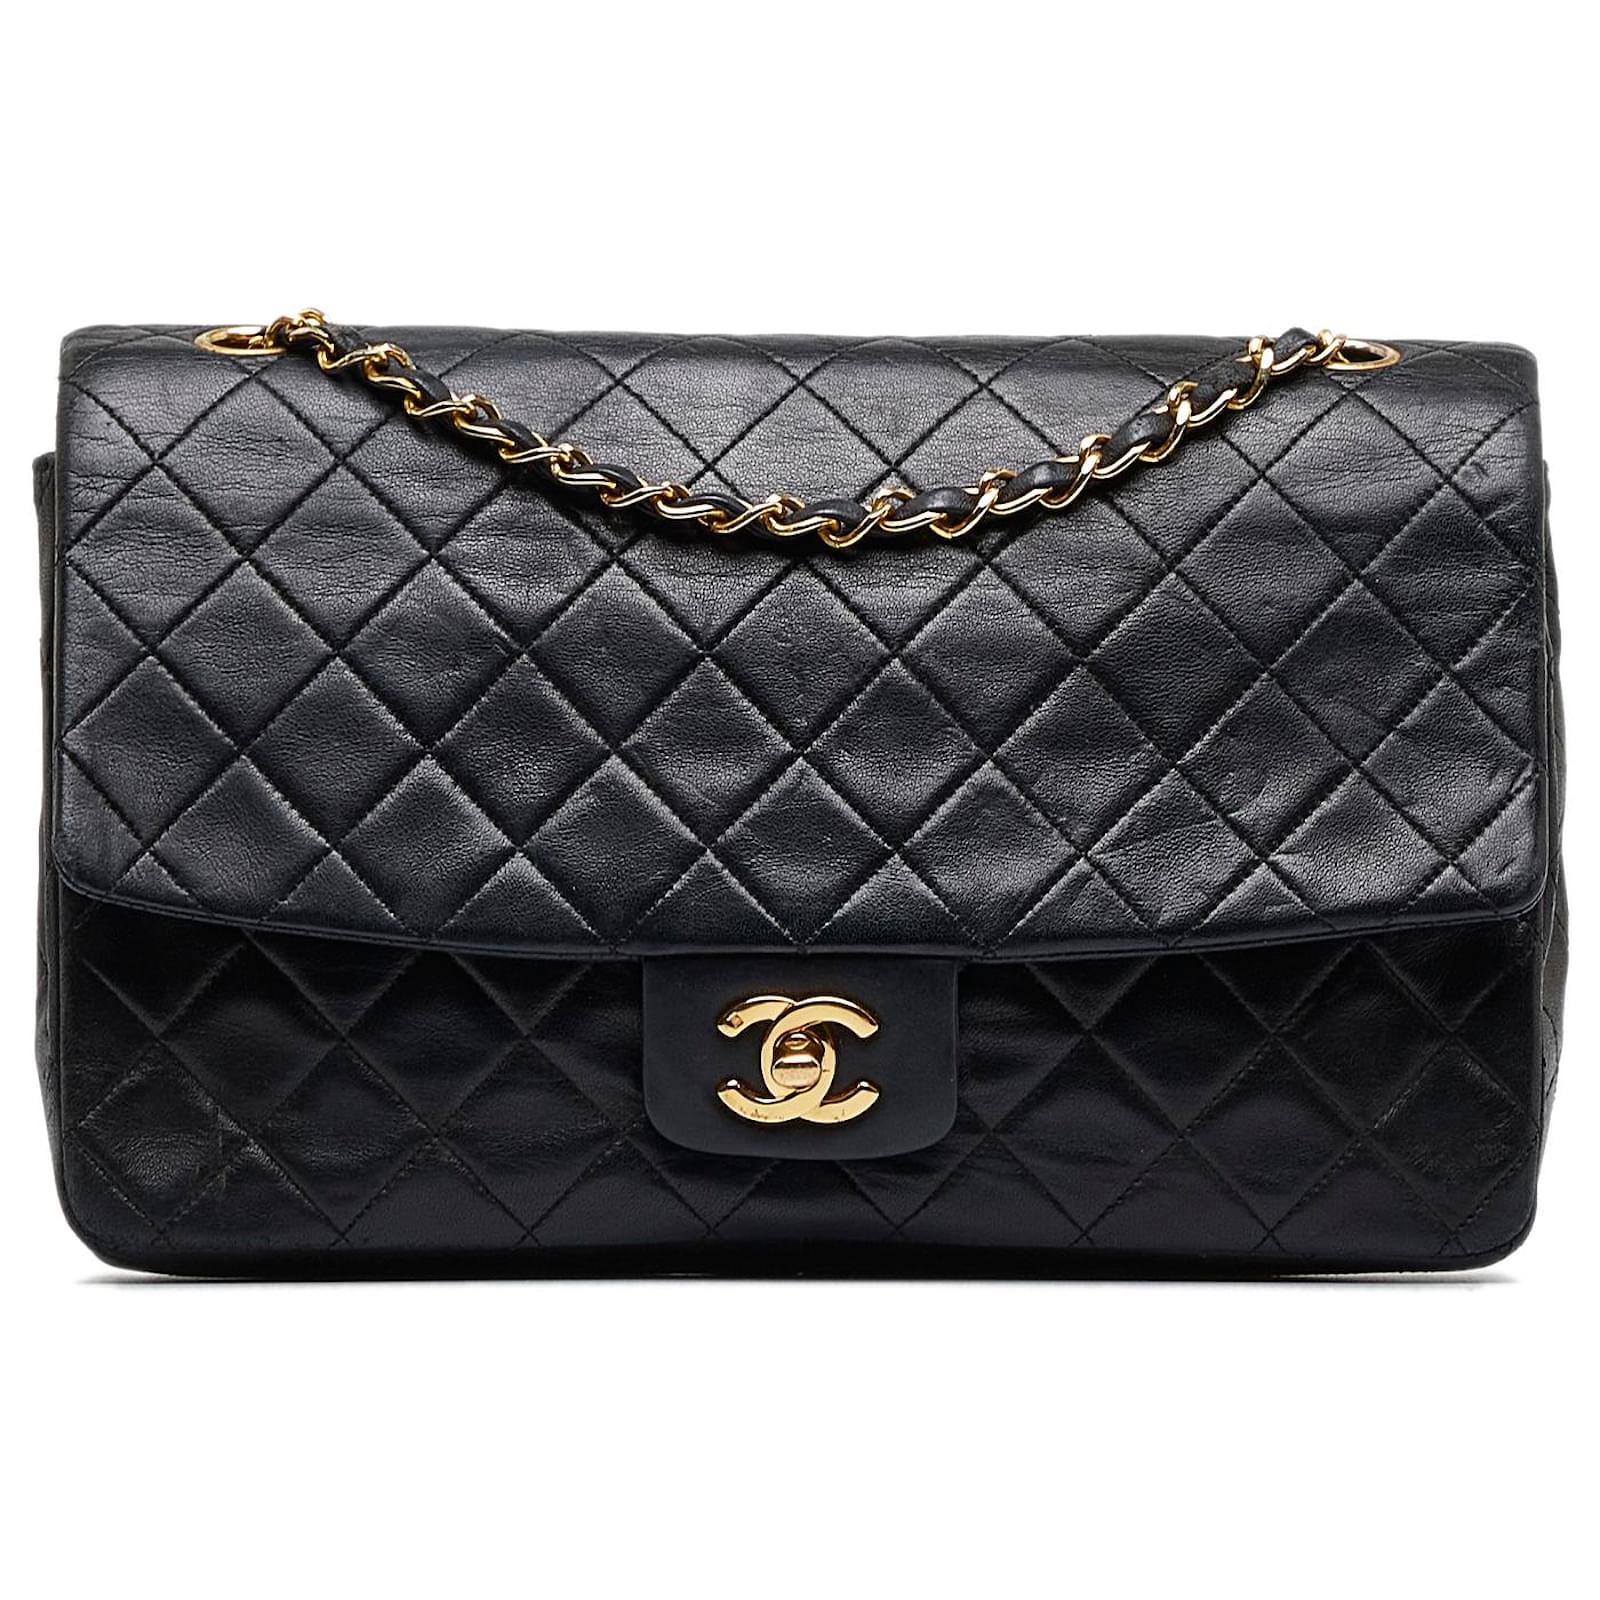 Vintage Chanel medium double flap bag - THE HOUSE OF WAUW